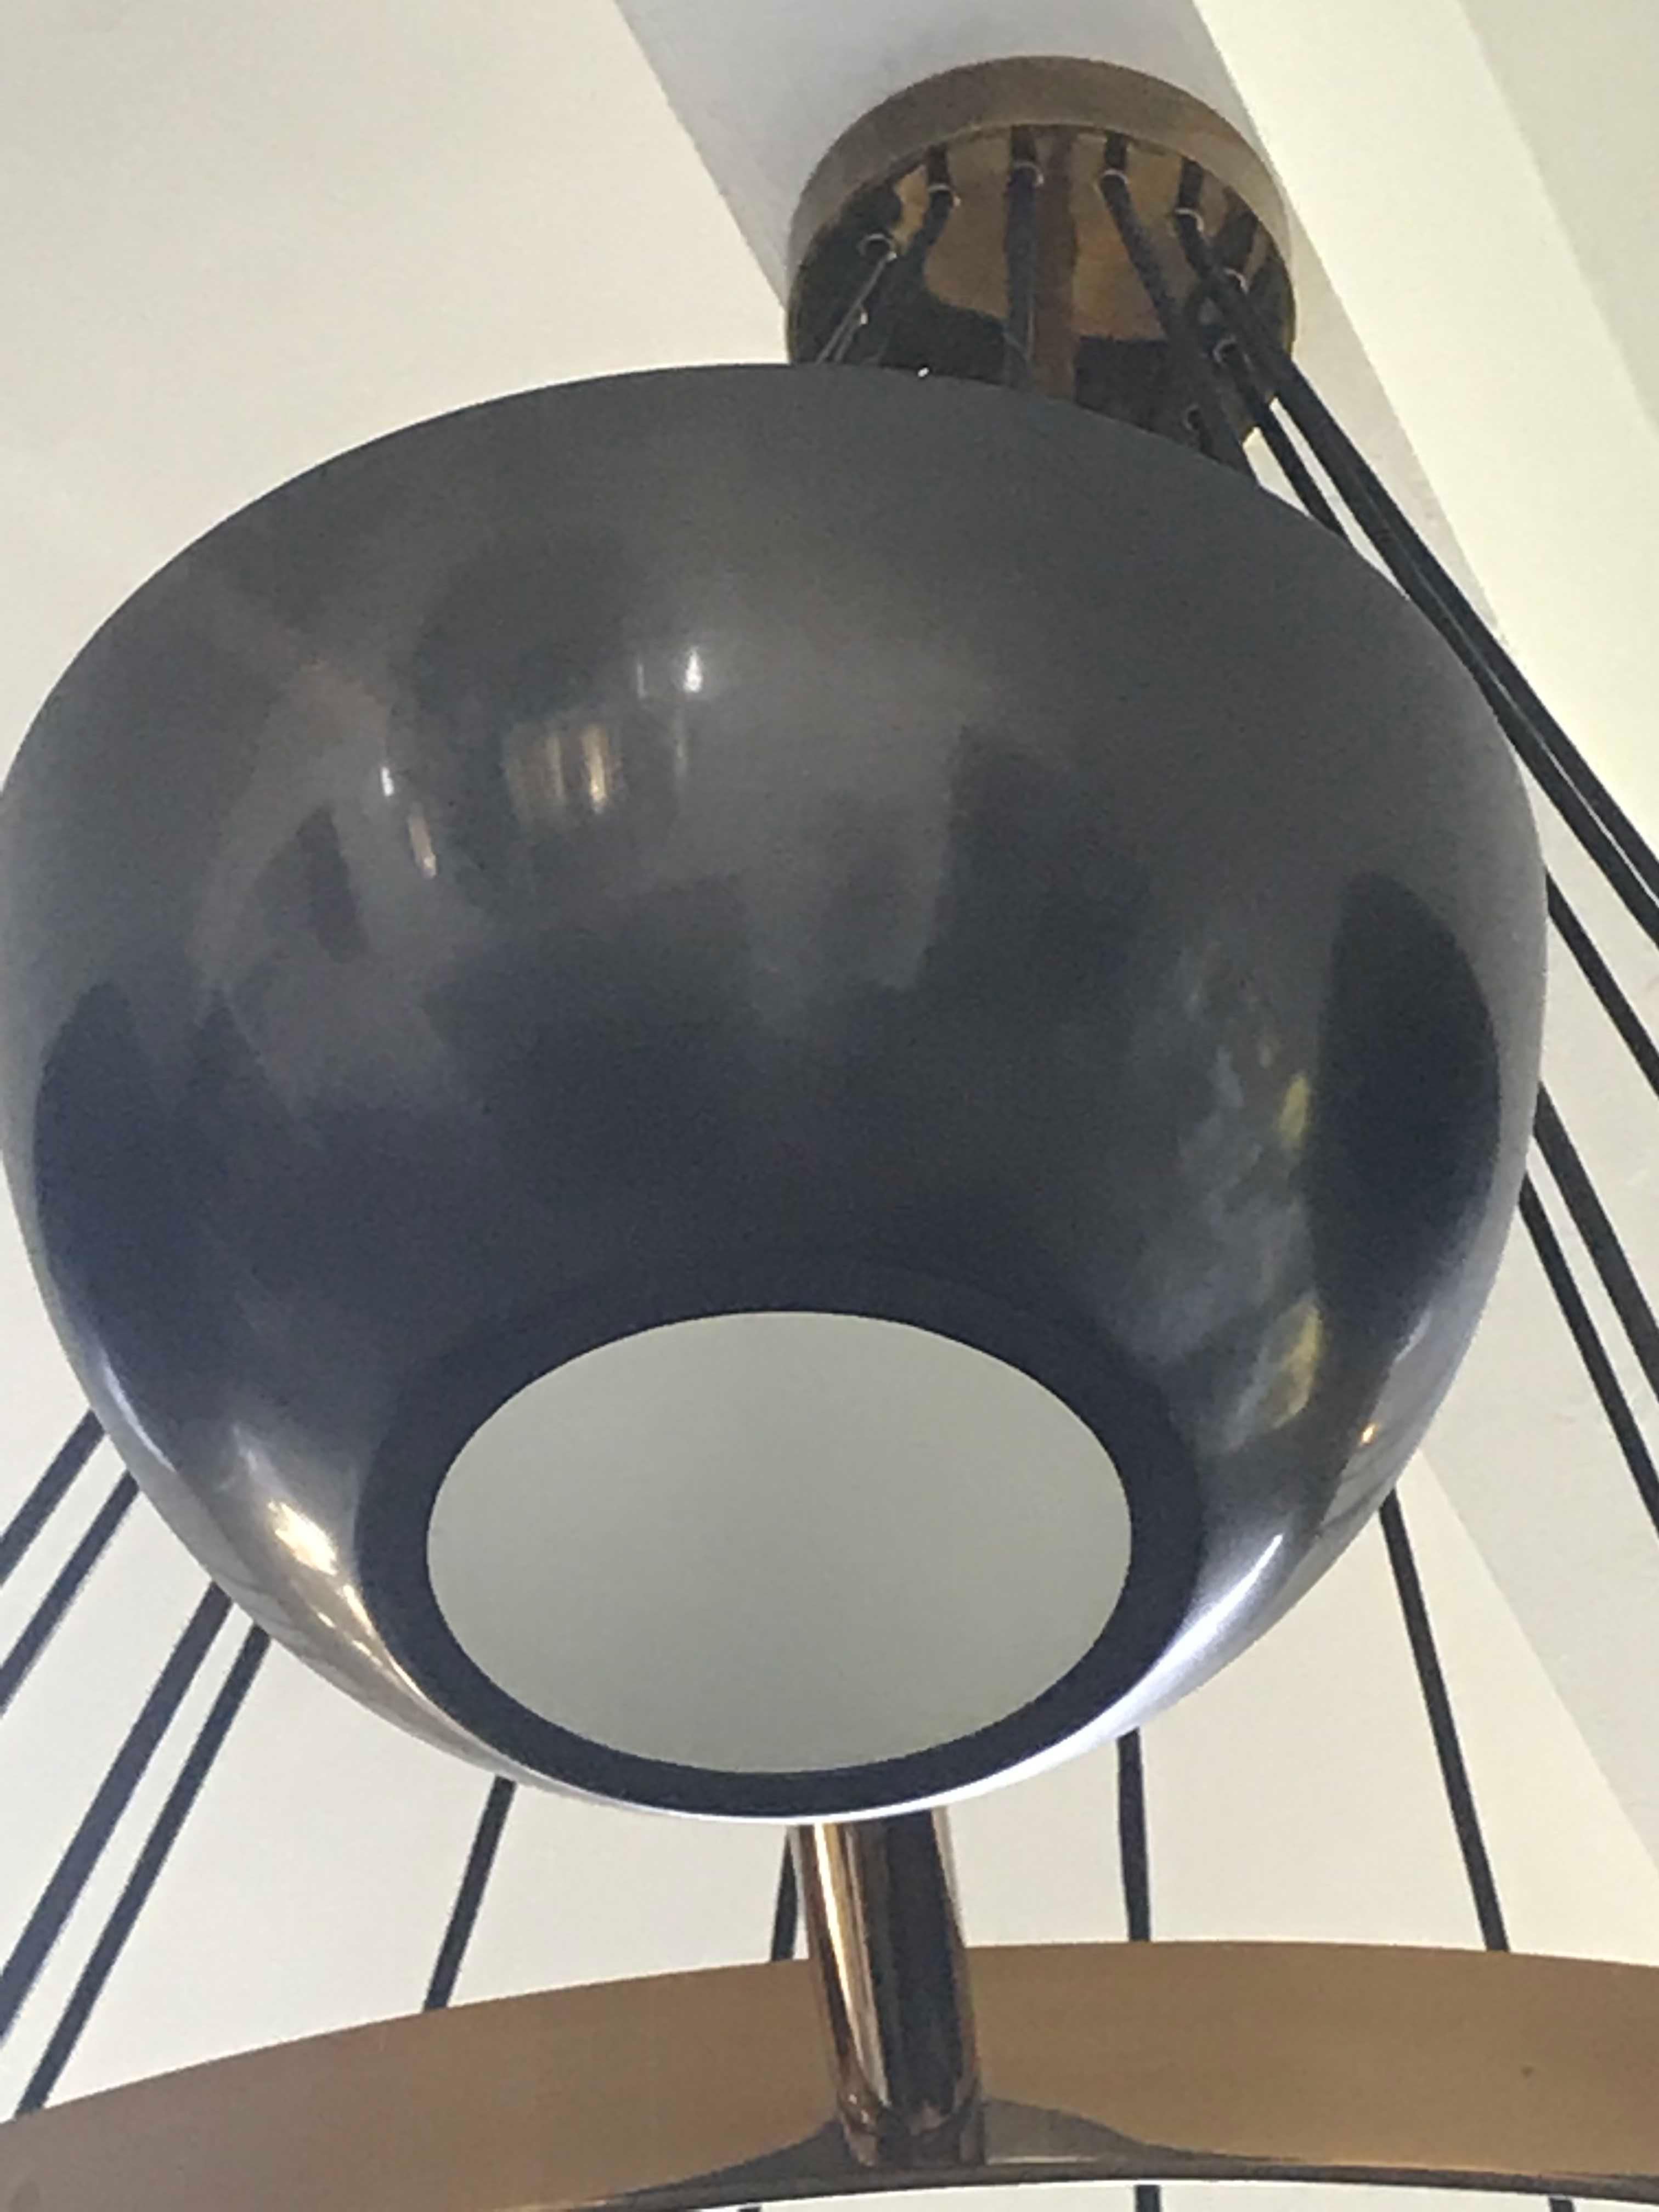 The Fellini Chandelier from the Modern Envy collection by On Madison. Custom chandelier inspired by Mid-Century Italian design. Price quoted is for the size as shown. Custom sizes and finishes are available. Please inquire for quote.